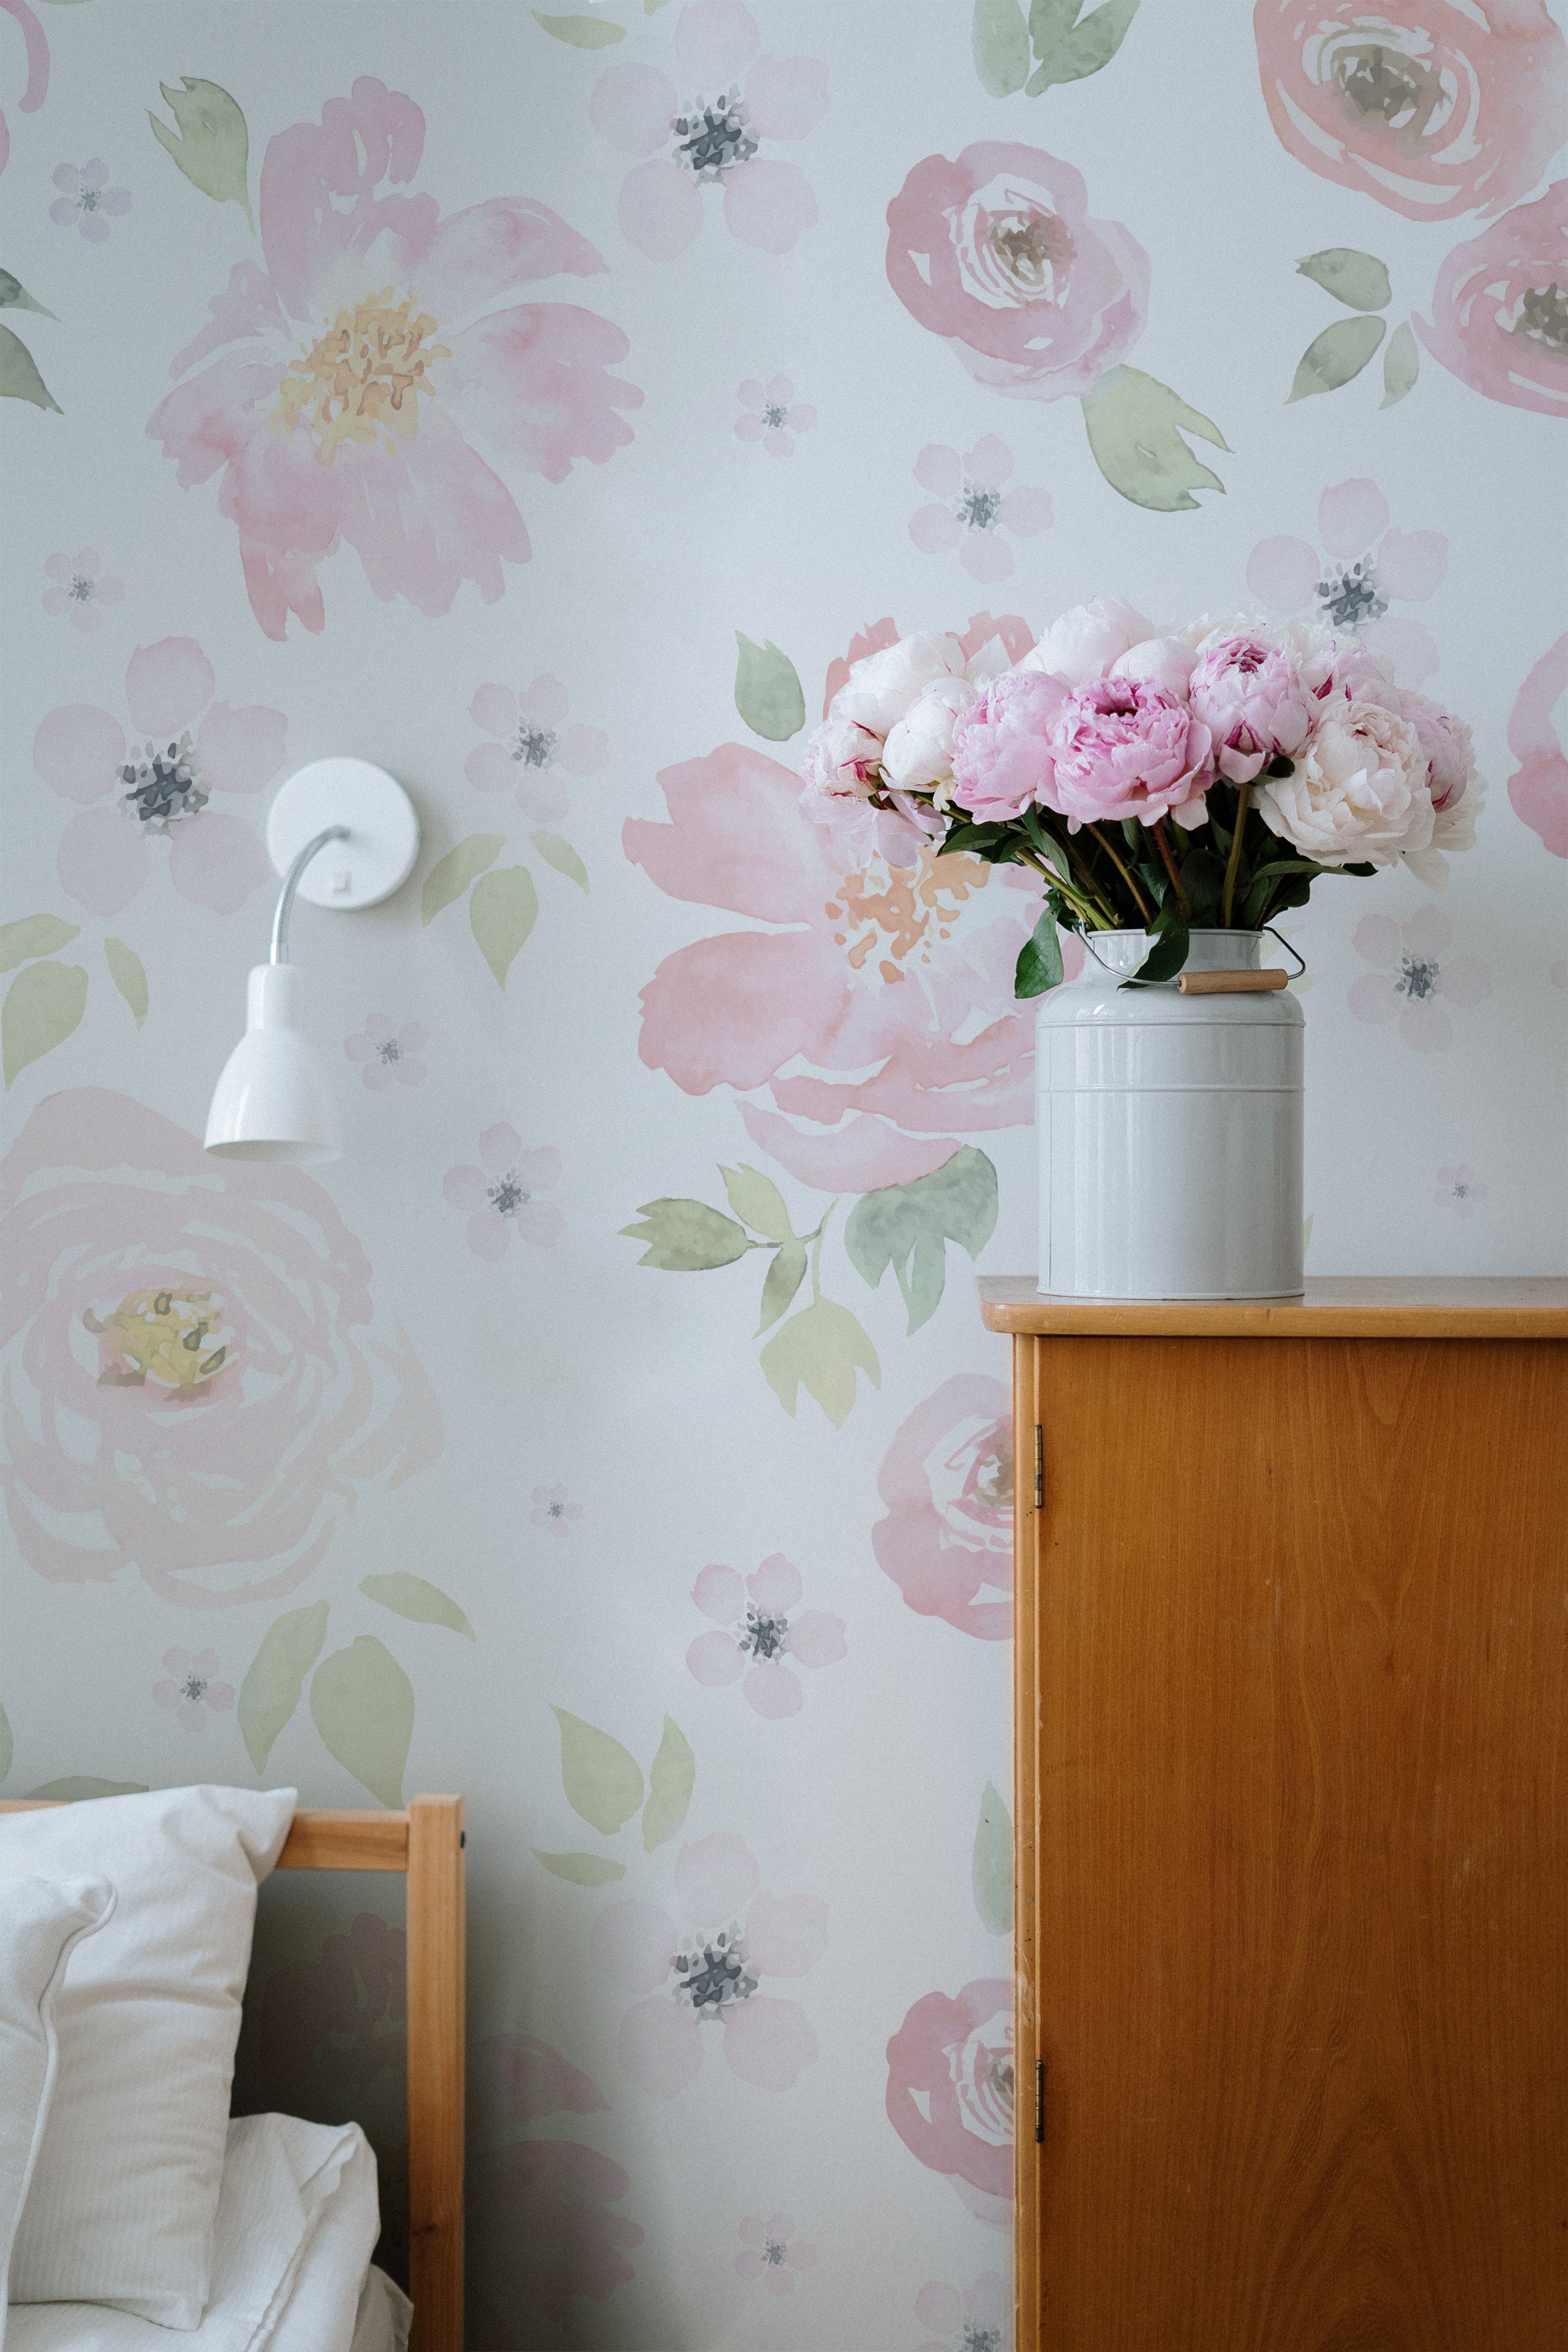 A corner of a bedroom with natural wood furniture, where a vase of fresh pink peonies on a nightstand complements the 'Gentle Blossom Wallpaper', enhancing the room's romantic and serene ambiance.